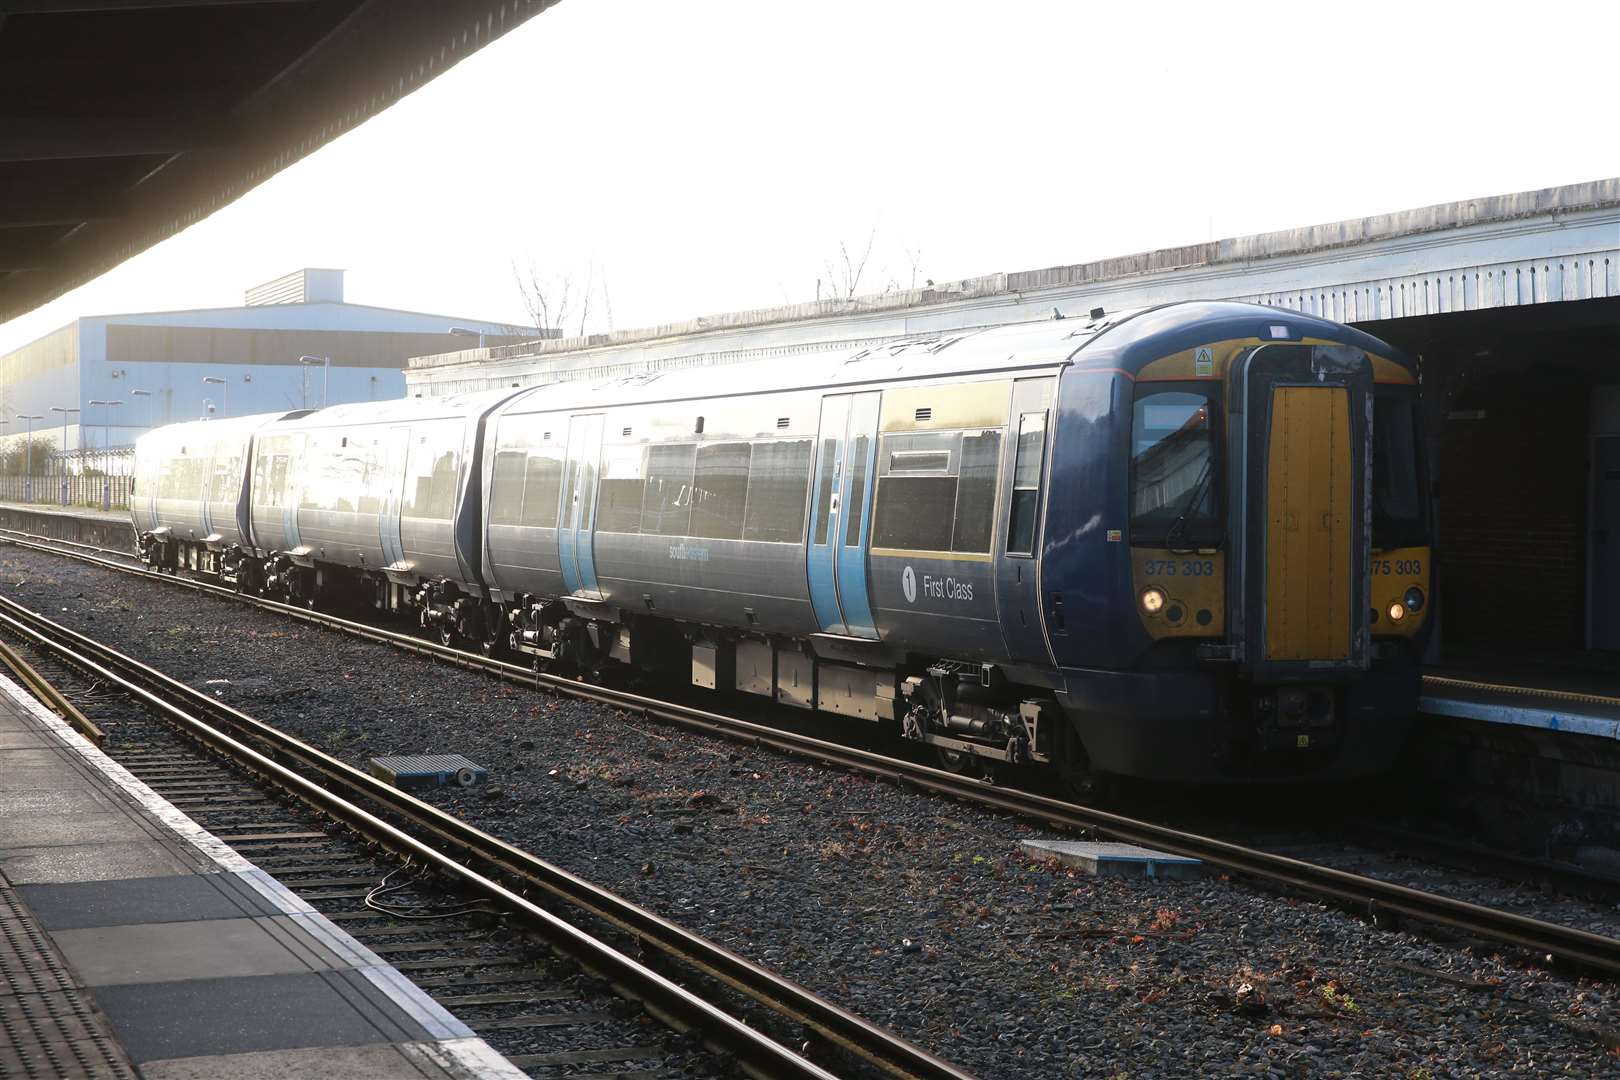 If approved a train would run from Sheerness to London Victoria and mean commuters won't have to change at Sittingbourne anymore